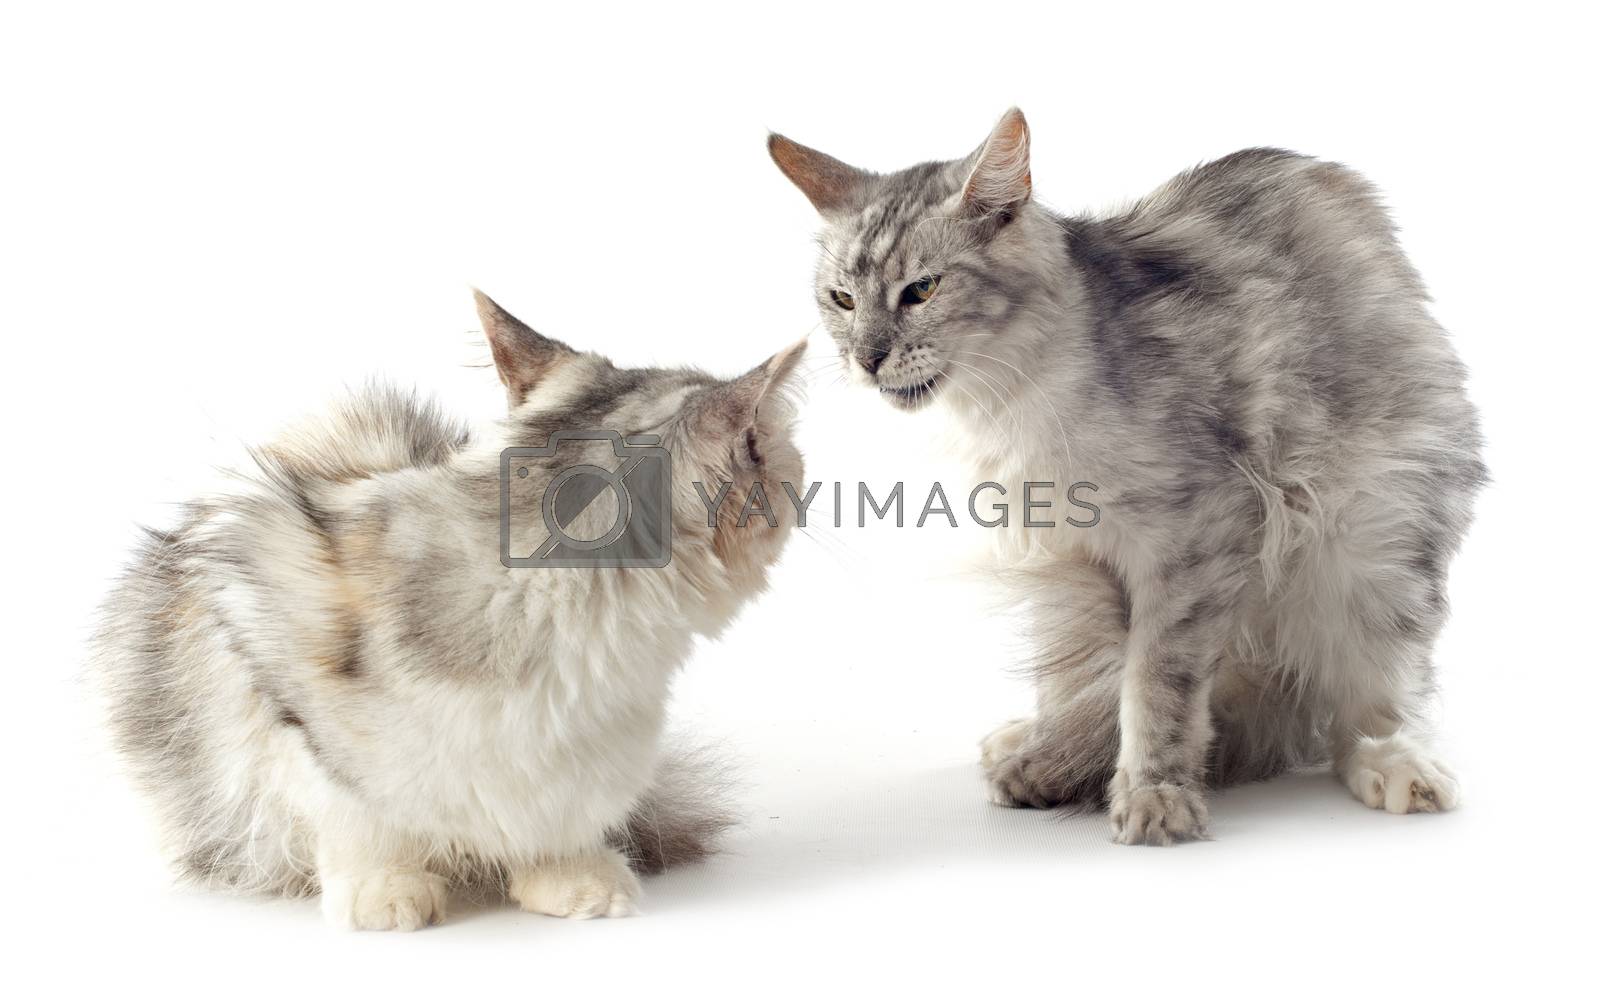 Royalty free image of maine coon cats by cynoclub